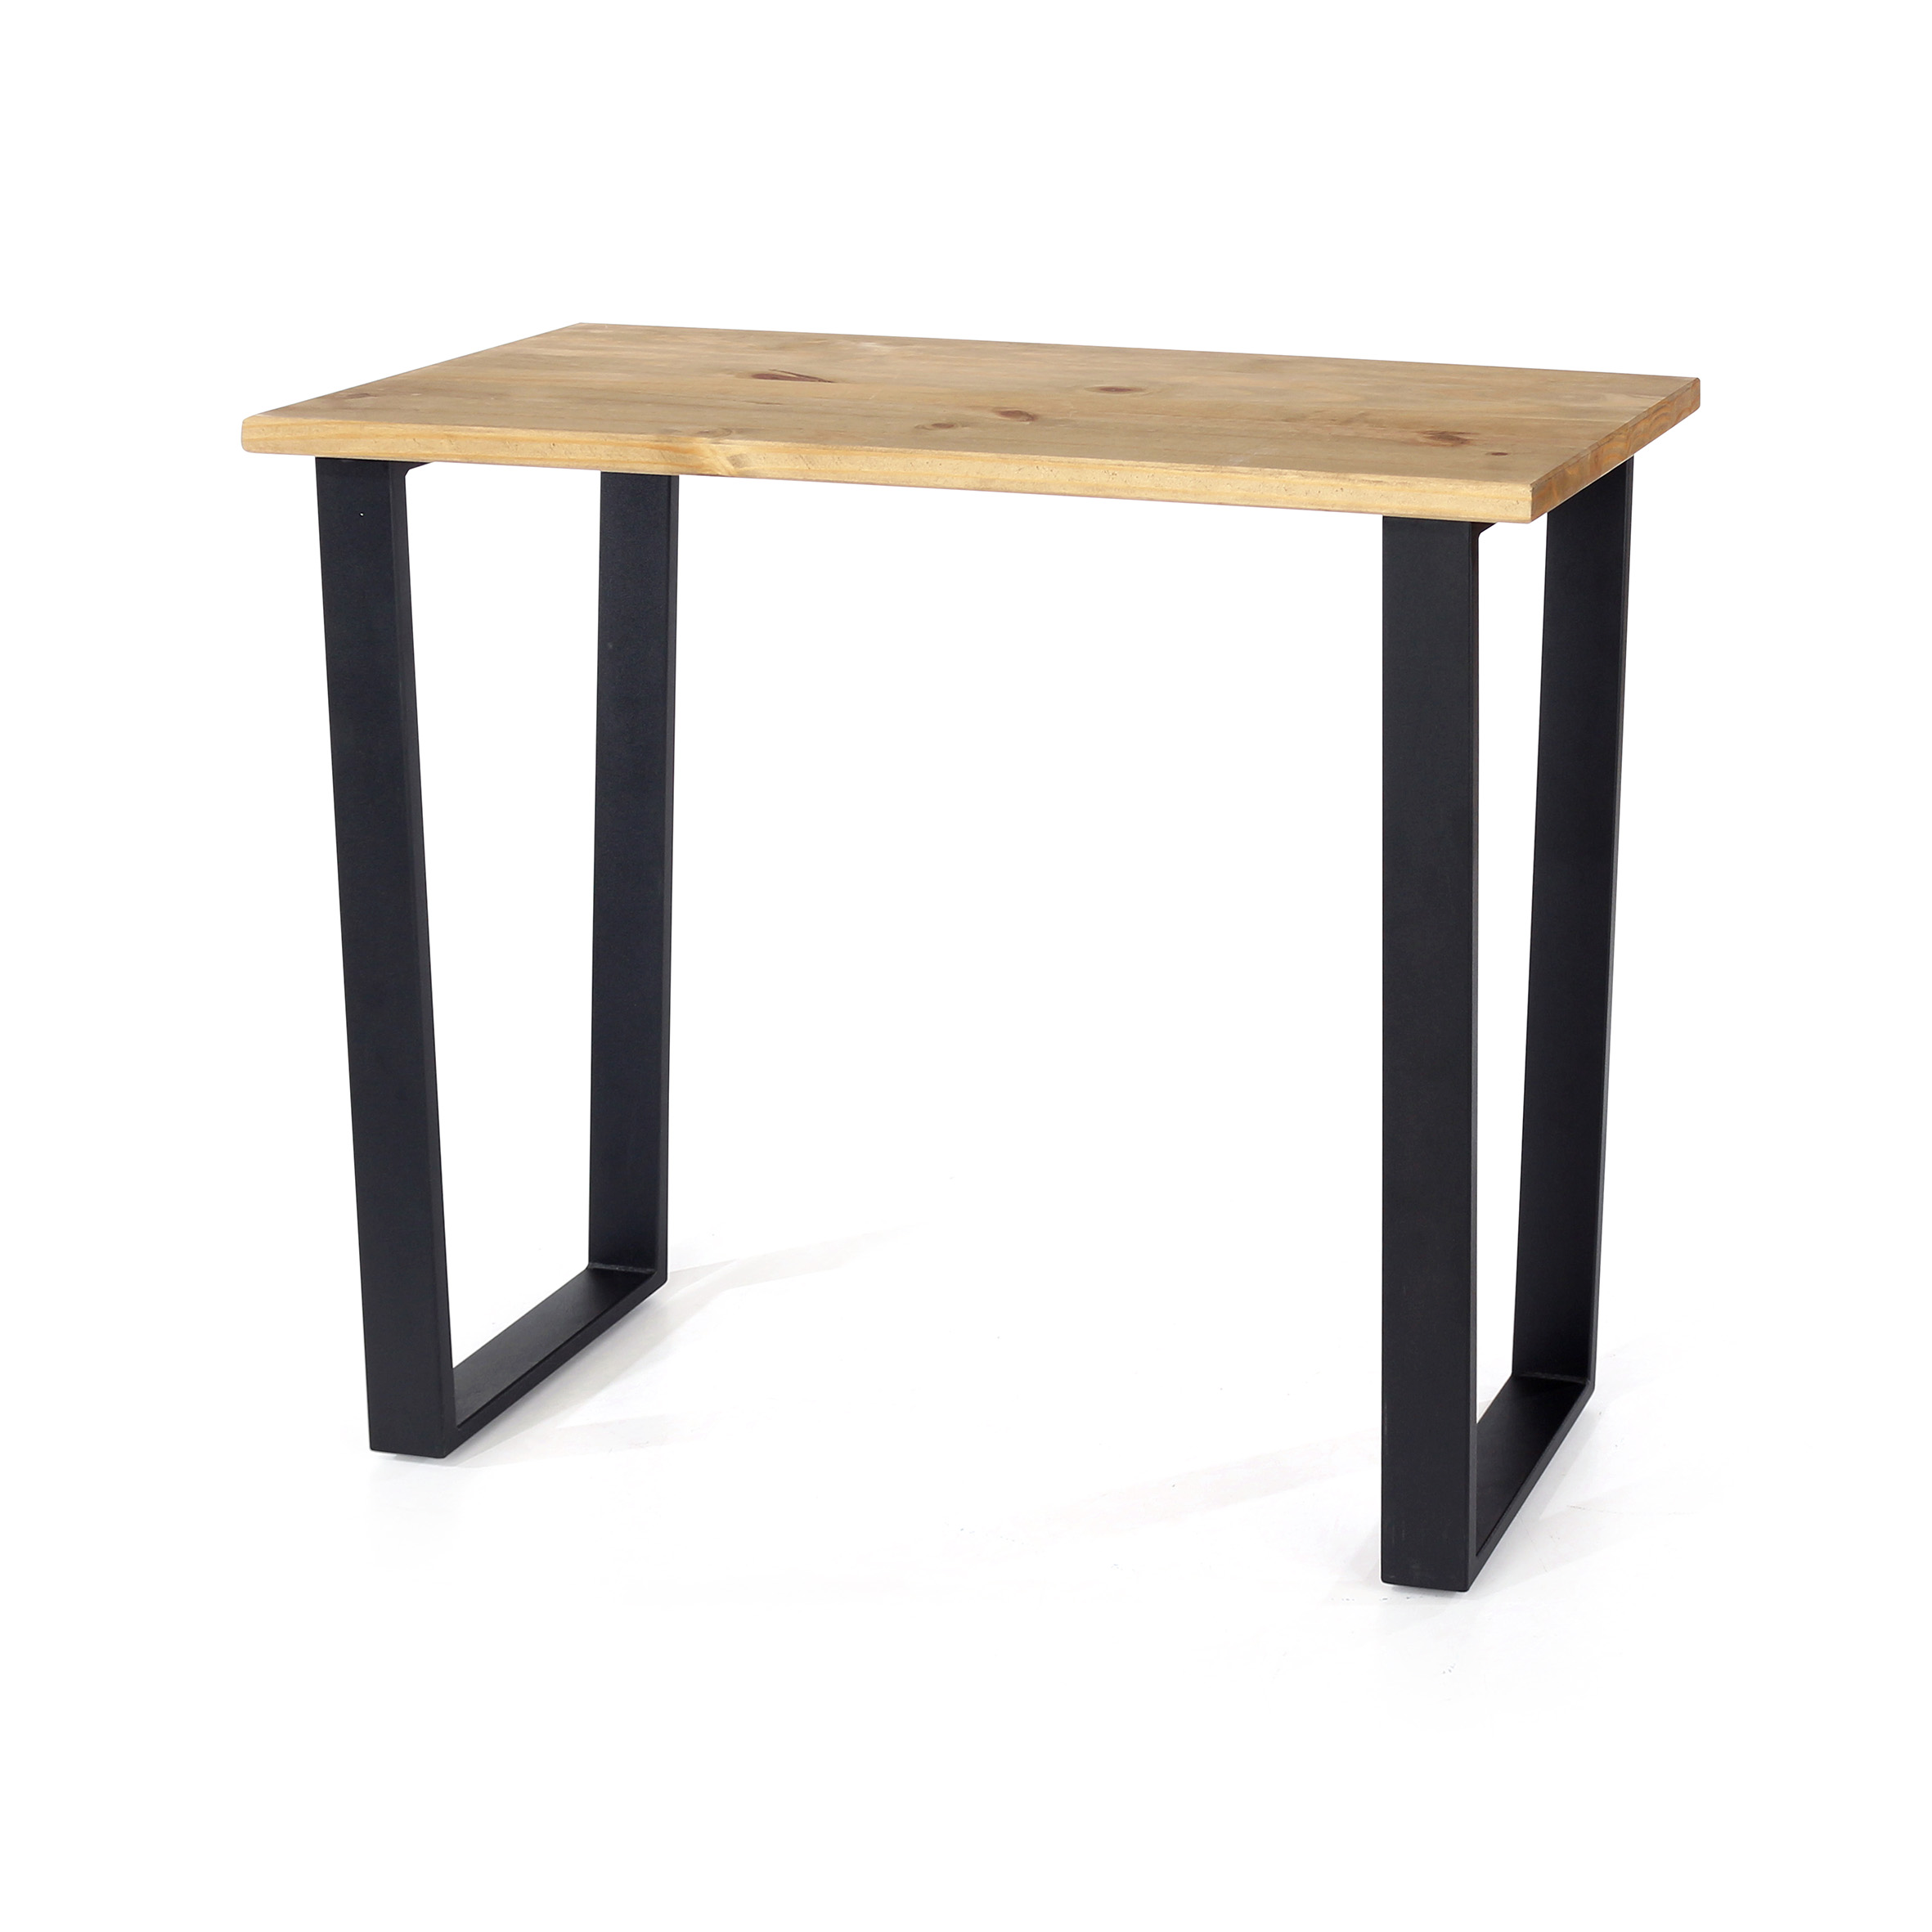 East console table with black metal legs